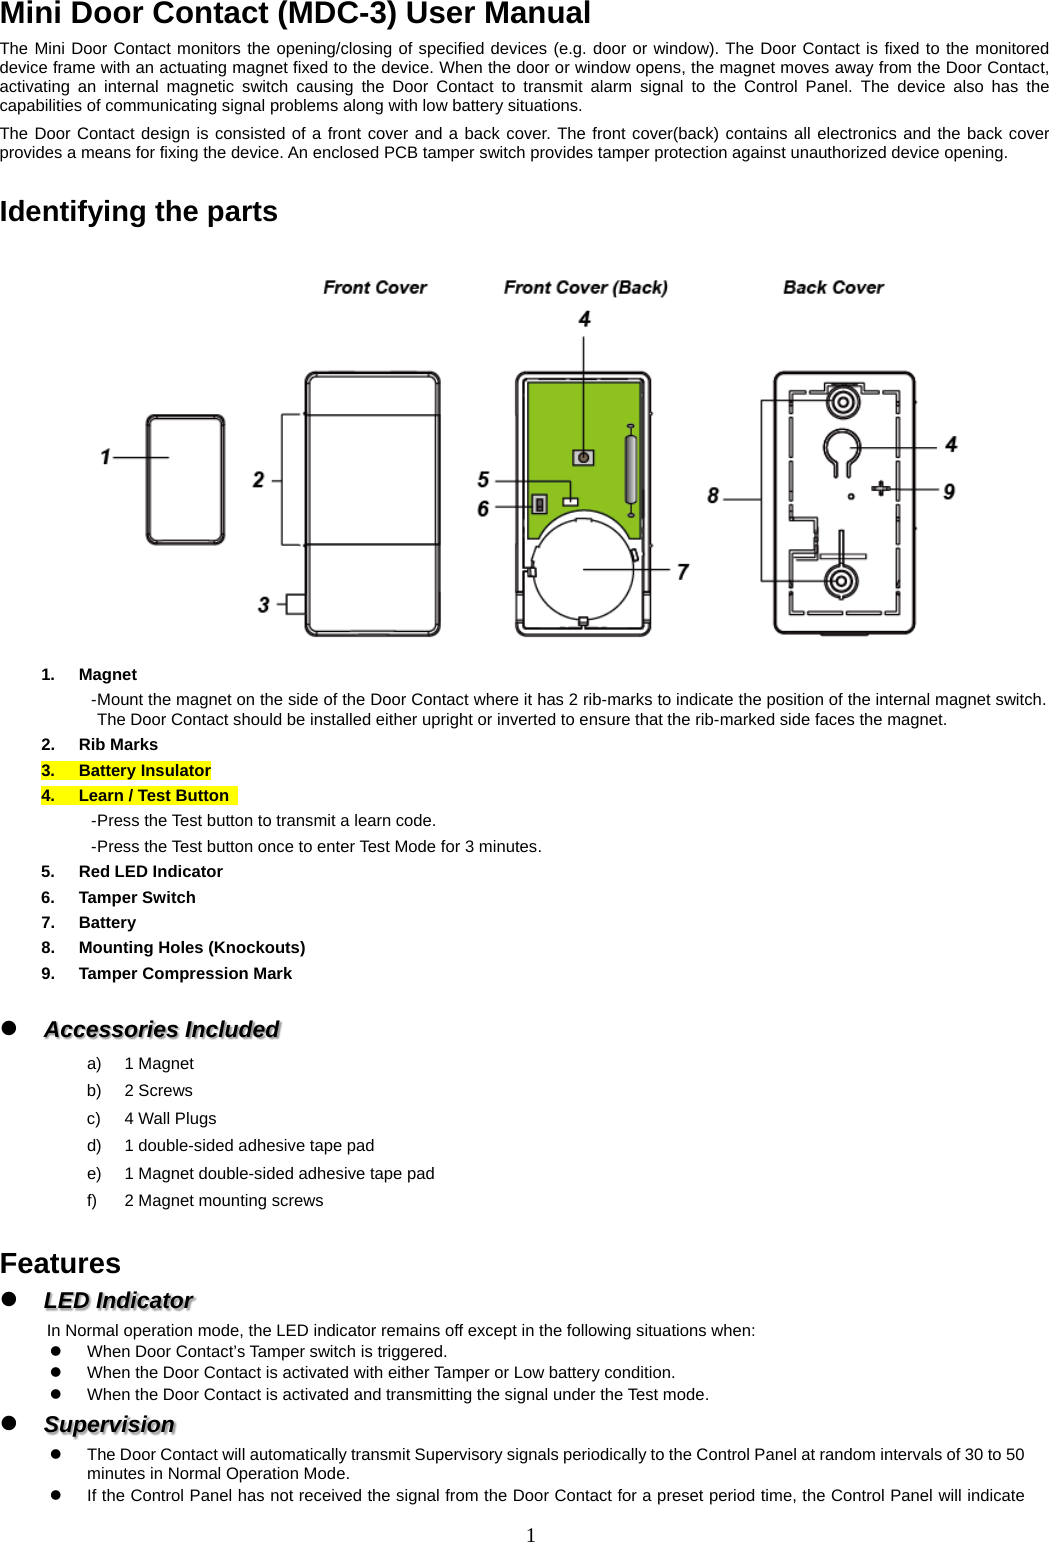 Mini Door Contact (MDC-3) User Manual The Mini Door Contact monitors the opening/closing of specified devices (e.g. door or window). The Door Contact is fixed to the monitored device frame with an actuating magnet fixed to the device. When the door or window opens, the magnet moves away from the Door Contact, activating an internal magnetic switch causing the Door Contact to transmit alarm signal to the Control Panel. The device also has the capabilities of communicating signal problems along with low battery situations. The Door Contact design is consisted of a front cover and a back cover. The front cover(back) contains all electronics and the back cover provides a means for fixing the device. An enclosed PCB tamper switch provides tamper protection against unauthorized device opening.  Identifying the parts  1.  Magnet - Mount the magnet on the side of the Door Contact where it has 2 rib-marks to indicate the position of the internal magnet switch. The Door Contact should be installed either upright or inverted to ensure that the rib-marked side faces the magnet. 2.  Rib Marks 3.  Battery Insulator 4.  Learn / Test Button   - Press the Test button to transmit a learn code. - Press the Test button once to enter Test Mode for 3 minutes. 5.  Red LED Indicator 6.  Tamper Switch 7.  Battery 8.  Mounting Holes (Knockouts) 9.  Tamper Compression Mark   Accessories Included a)  1 Magnet b)  2 Screws c)  4 Wall Plugs d)  1 double-sided adhesive tape pad e)  1 Magnet double-sided adhesive tape pad f)  2 Magnet mounting screws  Features  LED Indicator     In Normal operation mode, the LED indicator remains off except in the following situations when:   When Door Contact’s Tamper switch is triggered.   When the Door Contact is activated with either Tamper or Low battery condition.   When the Door Contact is activated and transmitting the signal under the Test mode.  Supervision     The Door Contact will automatically transmit Supervisory signals periodically to the Control Panel at random intervals of 30 to 50 minutes in Normal Operation Mode.  If the Control Panel has not received the signal from the Door Contact for a preset period time, the Control Panel will indicate 1  